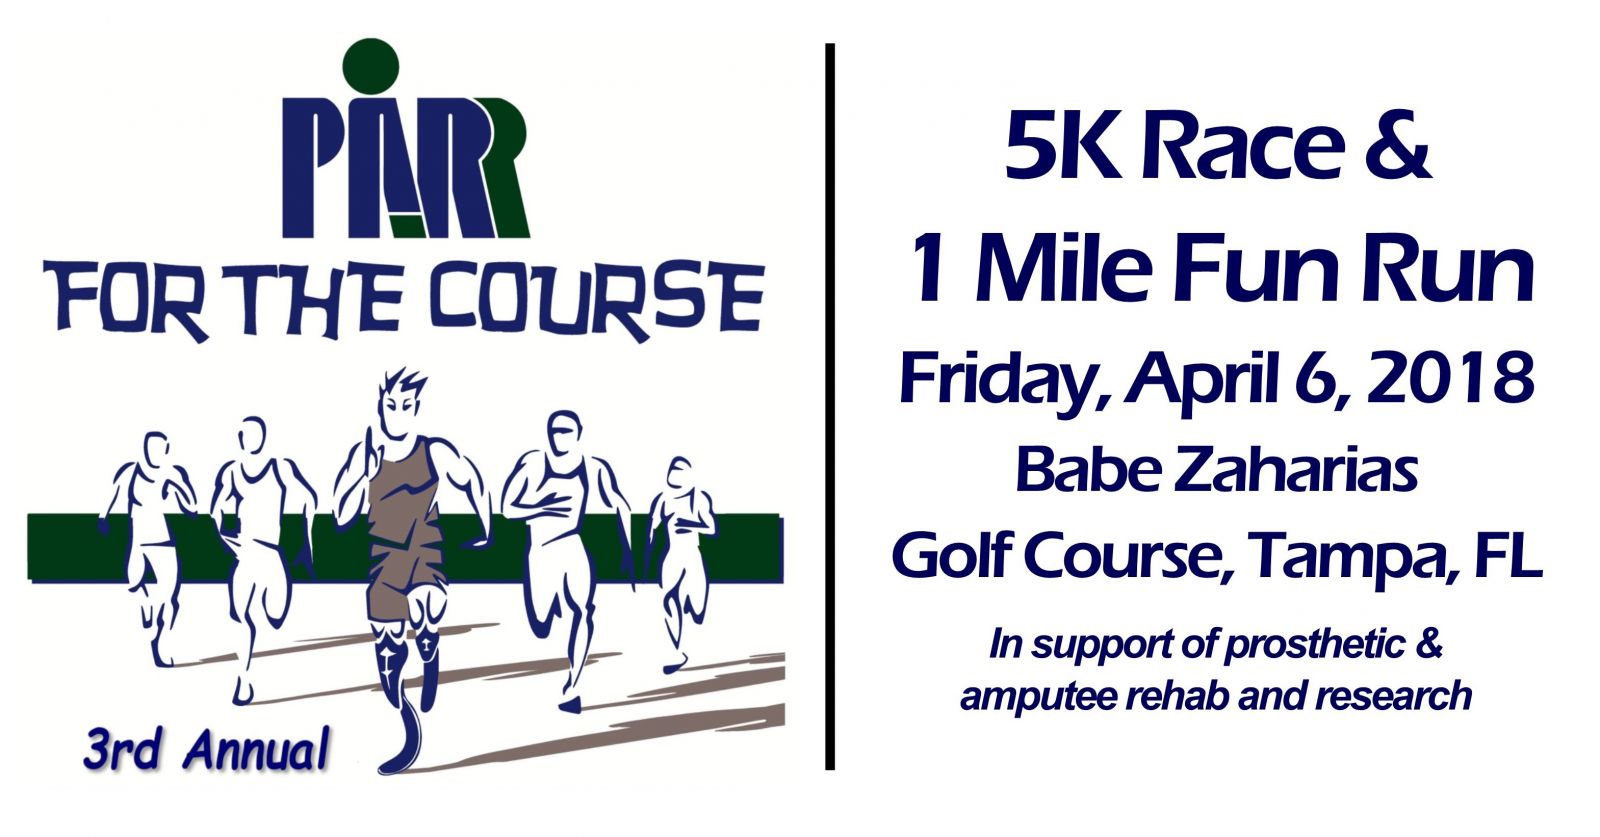 3rd Annual PARR for the Course 5K/1Mile Run